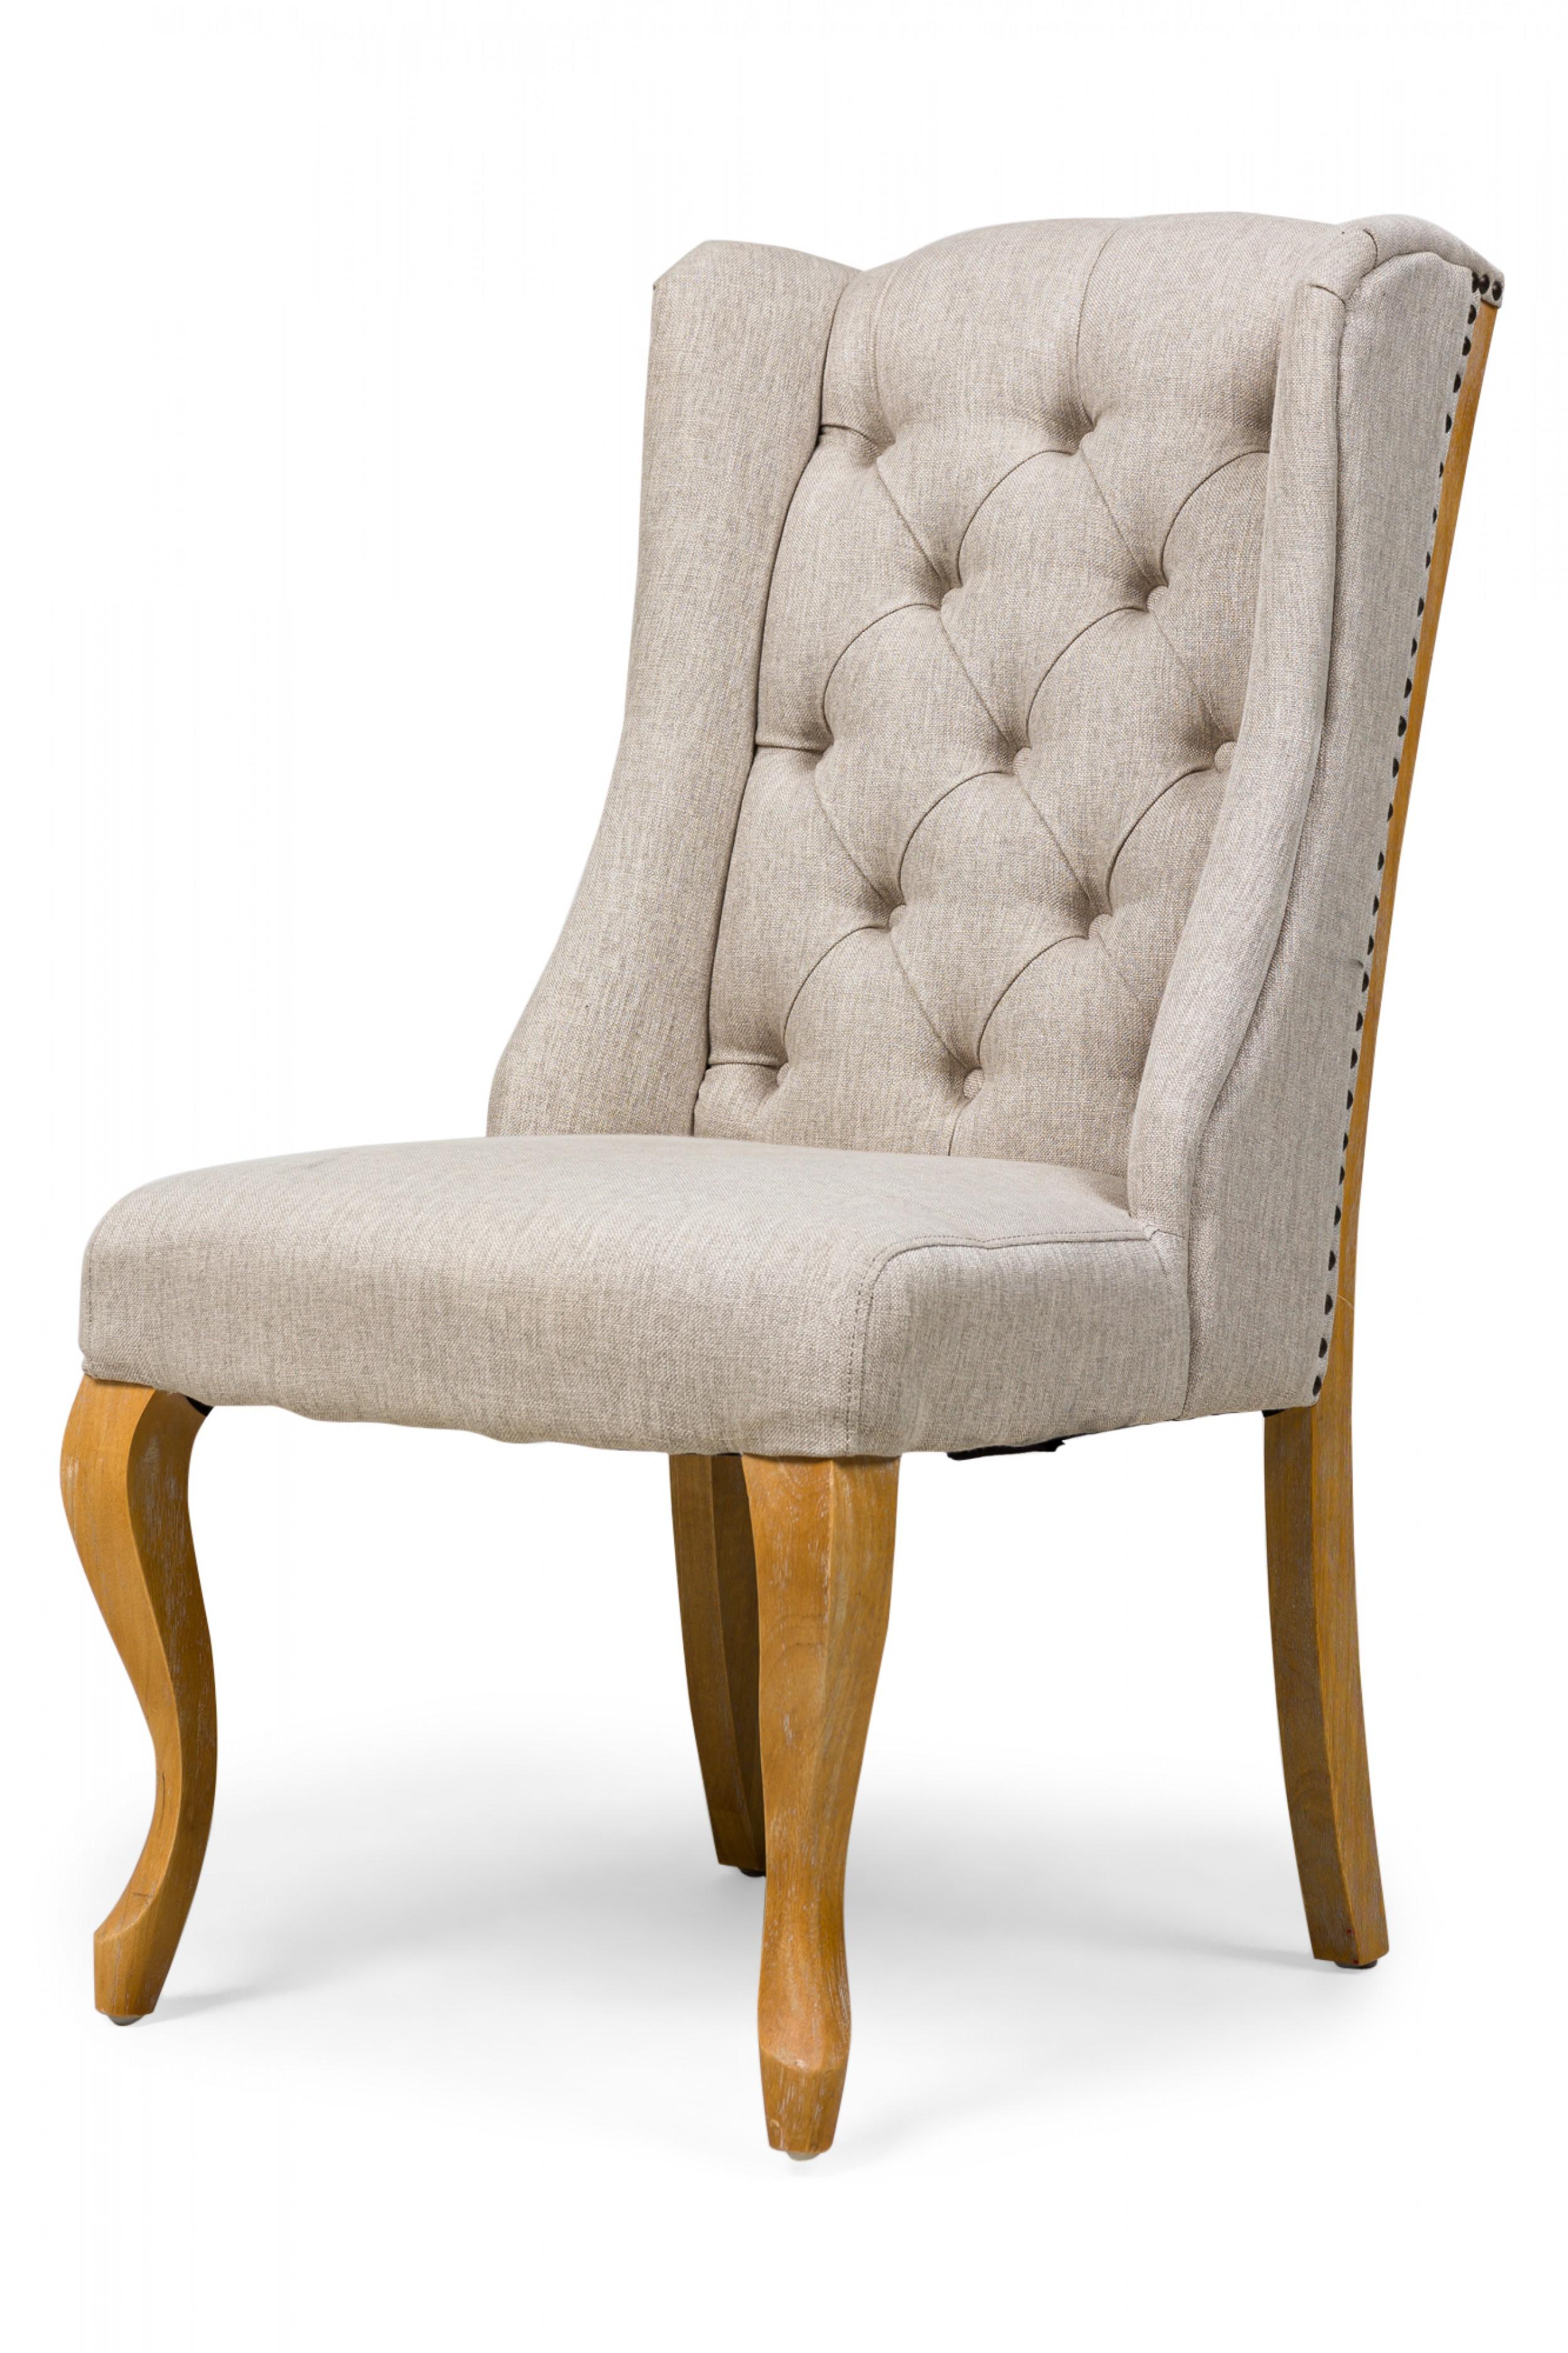 Woven 5 Midcentury American Button Tufted Gray Upholstered Wing Dining Chairs For Sale